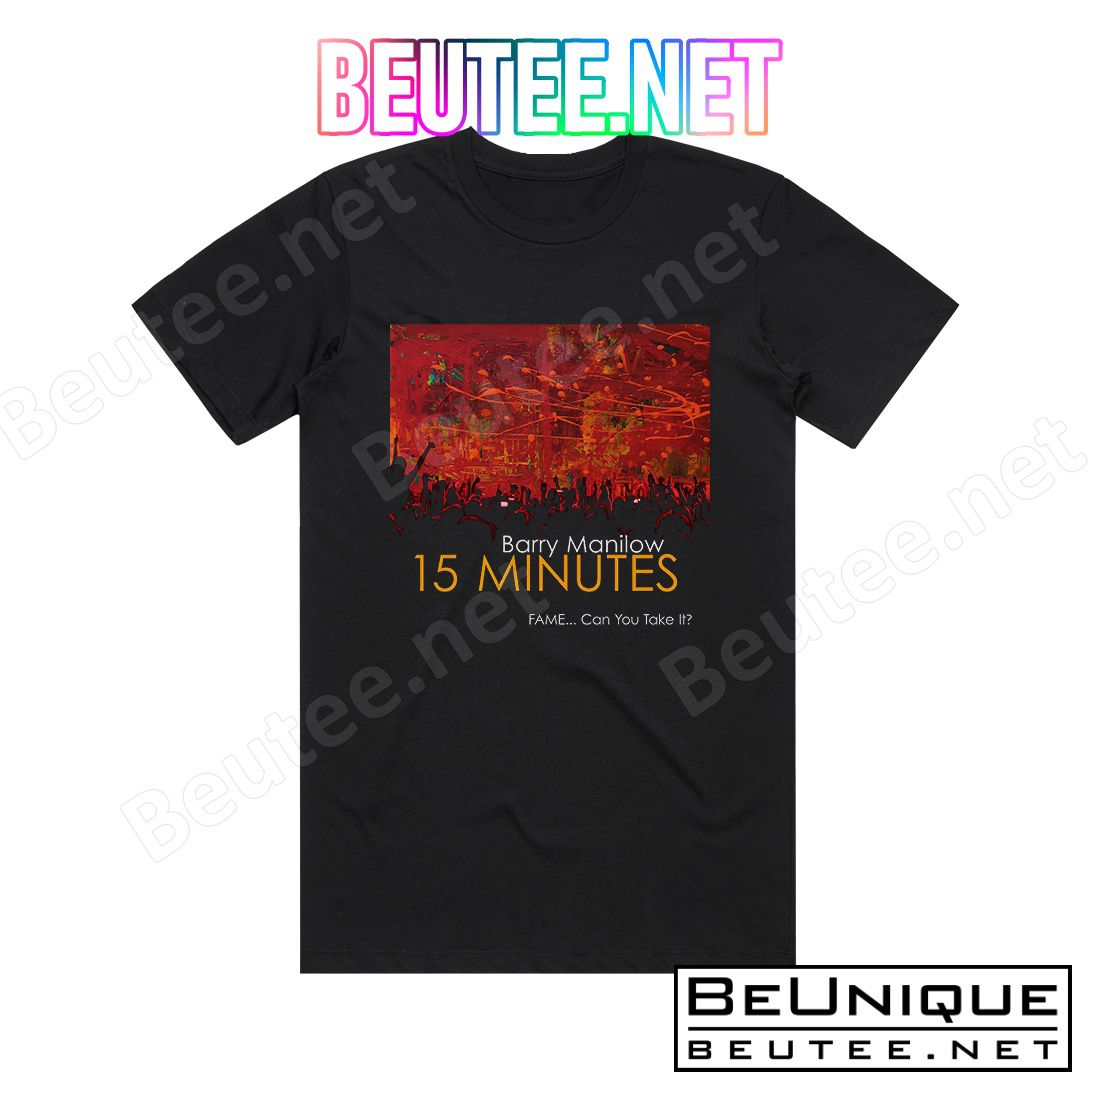 Barry Manilow 15 Minutes Album Cover T-Shirt